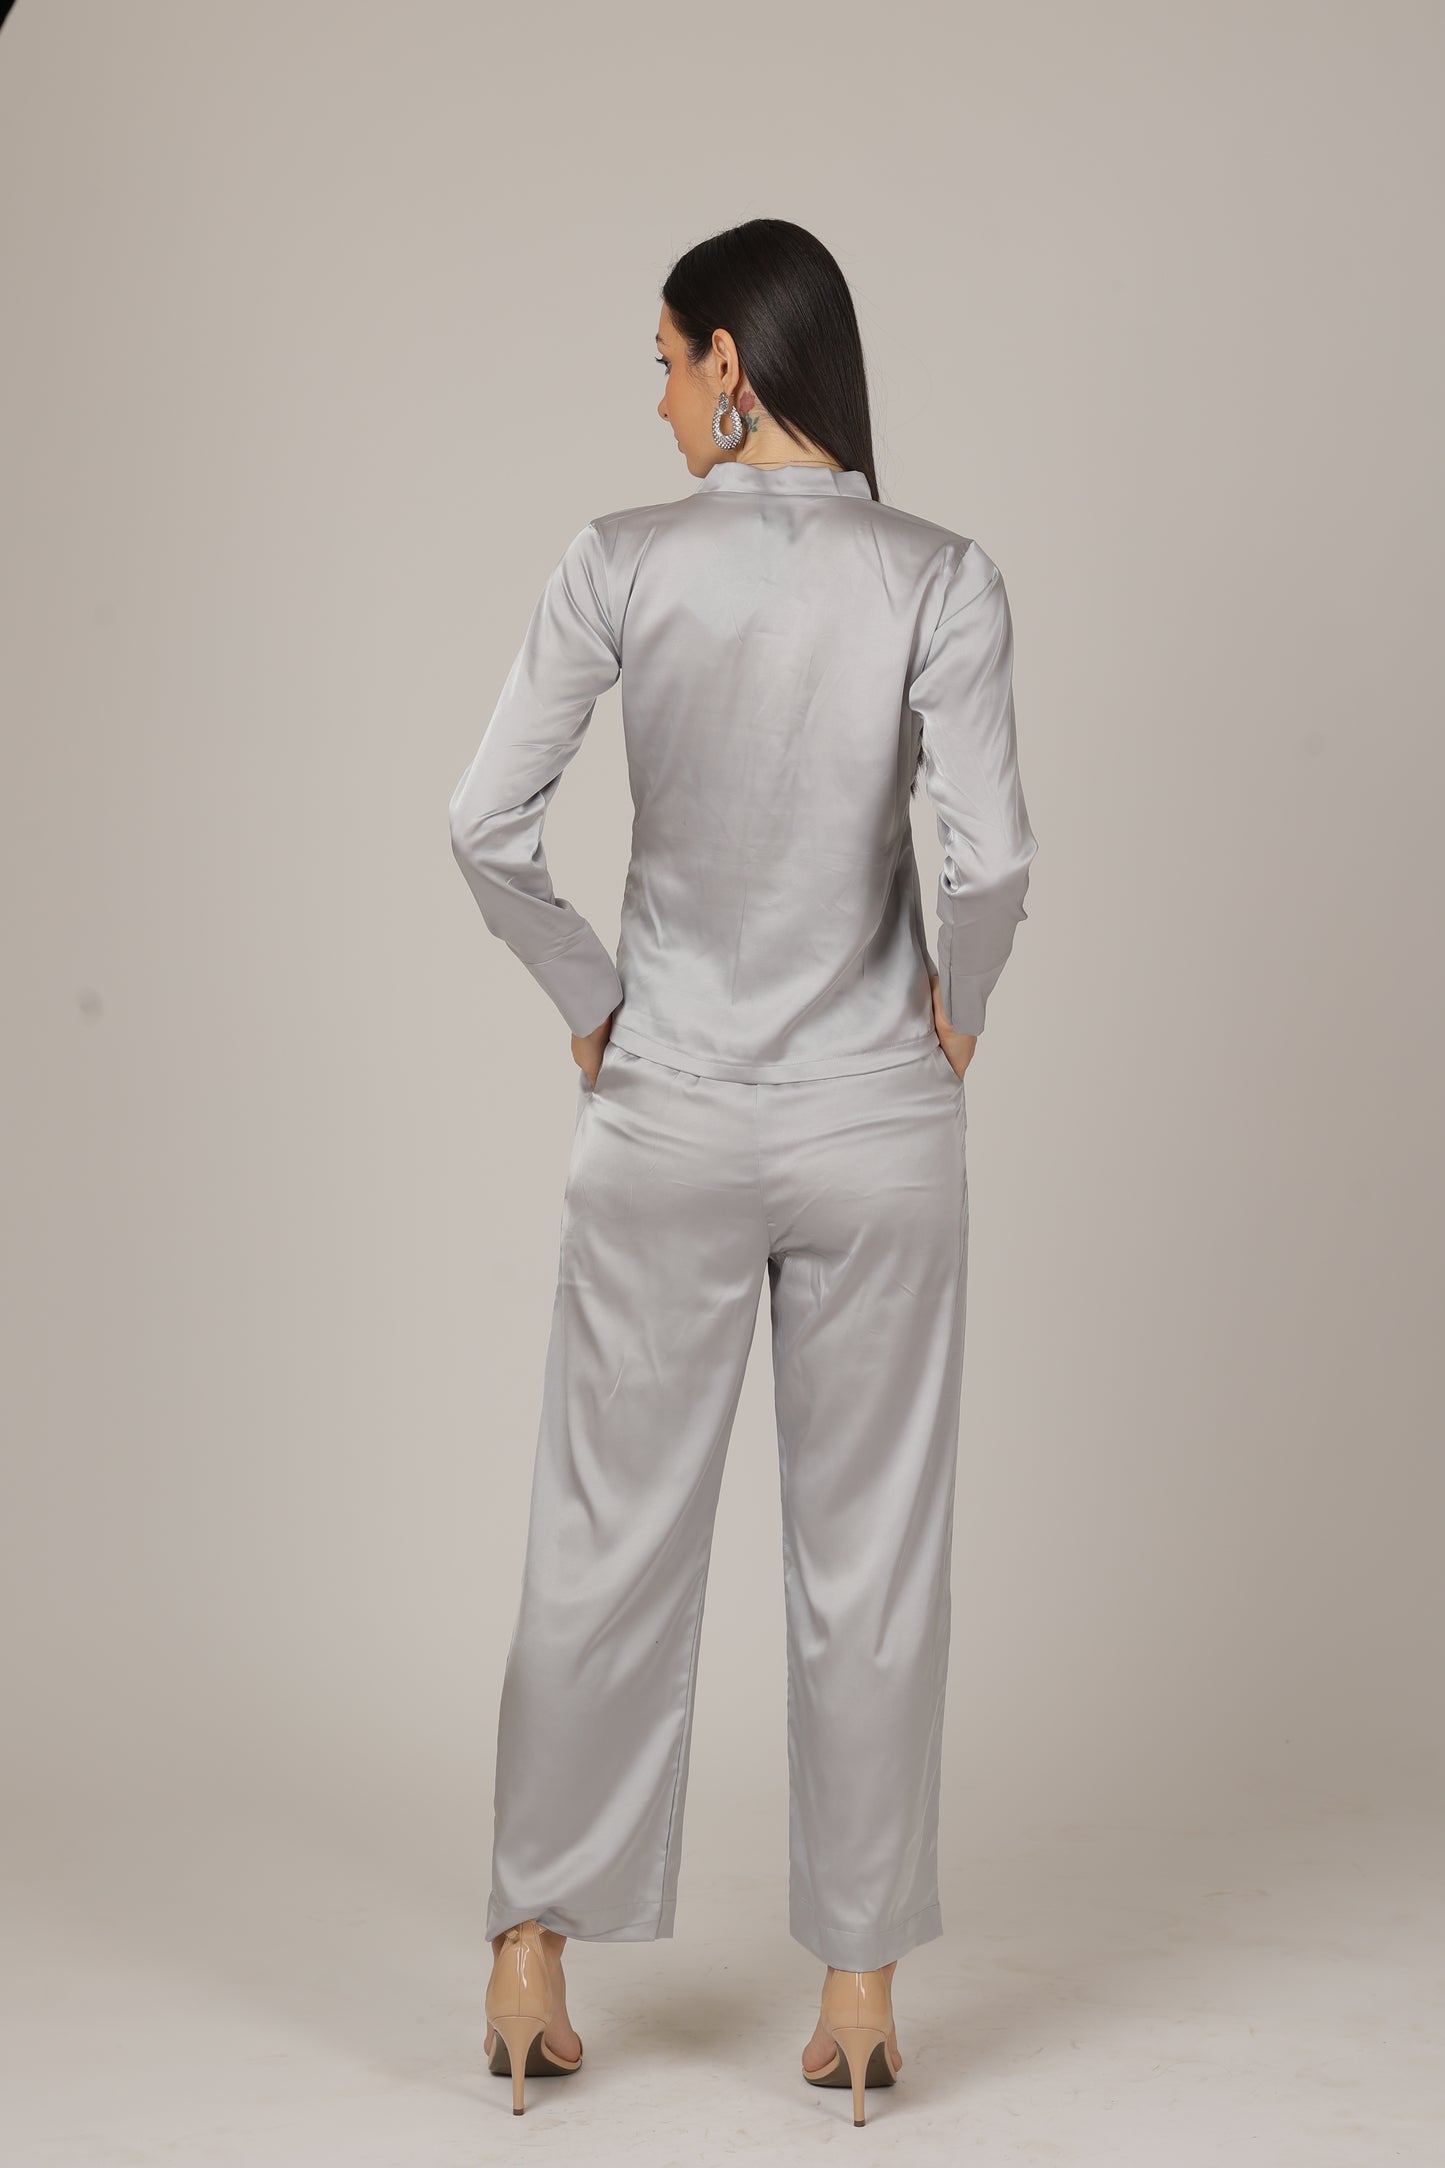 Effortless Elegance: The Front Knot & Straight Pant Co-ord